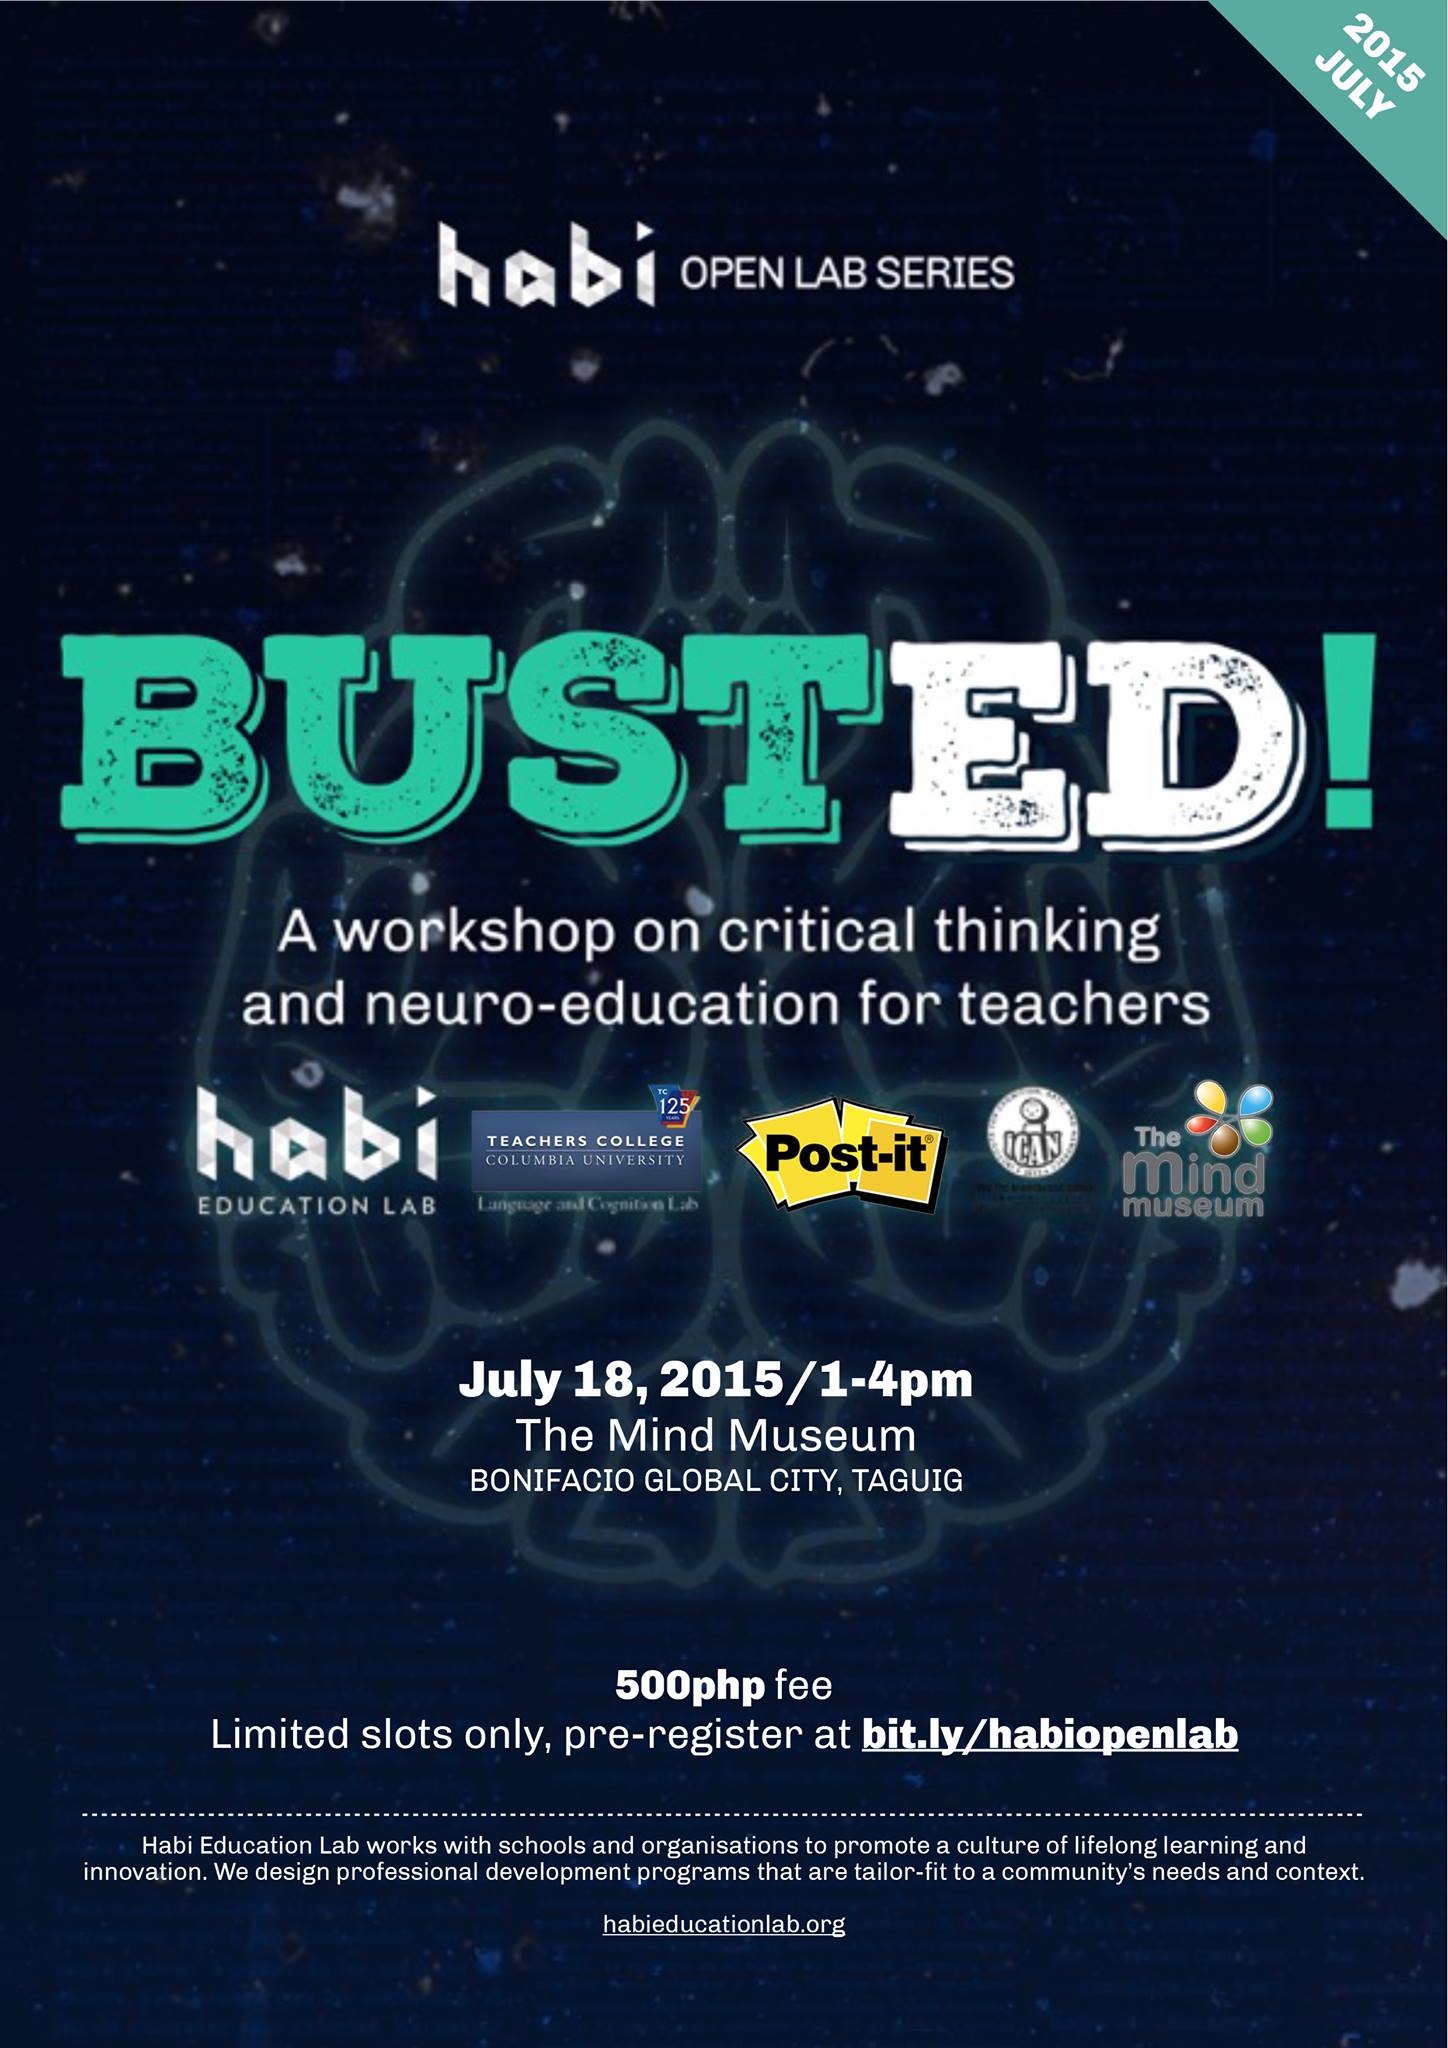 BustED: A workshop on critical thinking and neuro-education for teachers     Saturday, July 18     at 1:00pm - 4:00pm     Next Week · 86°F / 76°F Thunderstorm     	     Show Map     The Mind Museum     JY Campos Park, 3rd Avenue, Bonifacio Global City, 1634 Taguig     	     Find Tickets     Tickets Available     bit.ly Aside from clicking on "Going", please reserve your slot here: http://bit.ly/habiopenlab :) Brain-based learning. Mozart Effect. Metacognition. Left and Right Brain. Multiple Intelligences. Curious about how these words relate to education and learning? Is there evidence-based research behind these concepts? Habi Education Lab collaborates with education neuroscientist and school developer Mary Llenell Paz (Language and Cognition Lab, Teachers College, Columbia University, NY) to bring you this month’s Open Lab workshop. Let’s talk about the relevant concepts and research topics and BUST them one by one—by debunking old and tired myths and highlighting the relevant facts.“BustED: A workshop on critical thinking and neuro-education for teachers” will be held at one of our favorite facilities, The Mind Museum at Bonifacio Global City. This session is open to everyone, come spend your Saturday afternoon with fellow educators, researchers, scientists, students and all lifelong learners! July 18, 2015, Saturday 1-4PM The Mind Museum, MindPod Classroom Fee: P500/participant (light snacks and certificates included) Reserve your slot here: http://bit.ly/habiopenlab Bring your own device (smartphone, tablets, etc.) as individual access to Google is necessary during the session Please share this post to your family and friends! See you :) - Habi Education Lab http://habieducationlab.org/openlab